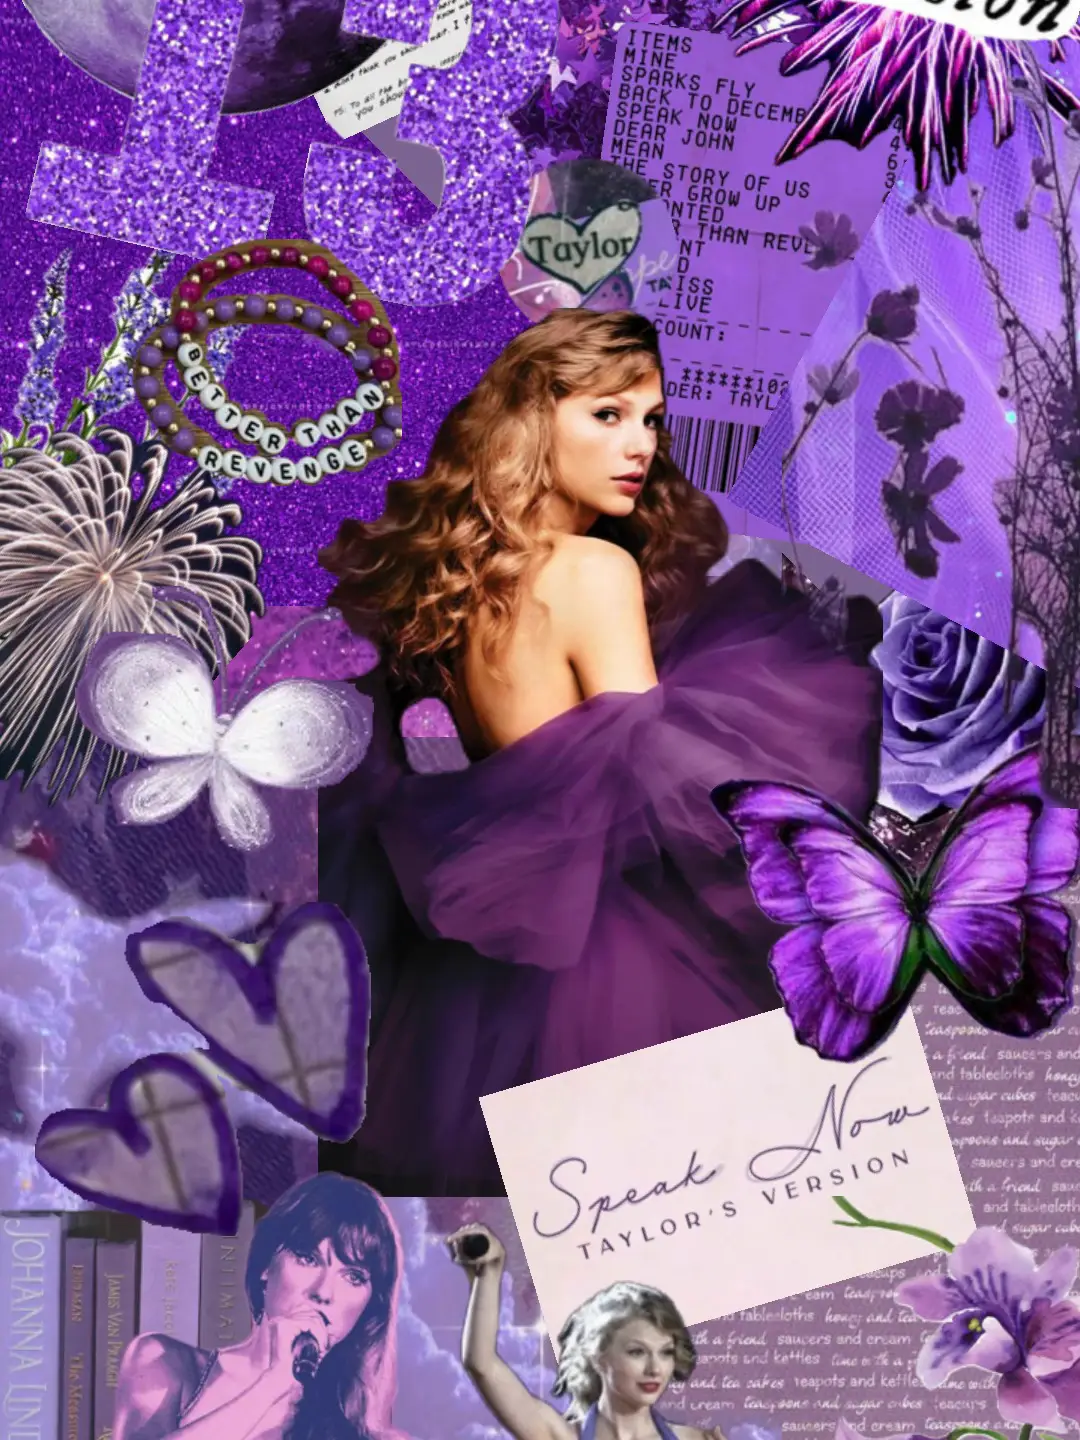 A collage of Taylor Swift in purple with butterflies and sparkles. - Taylor Swift